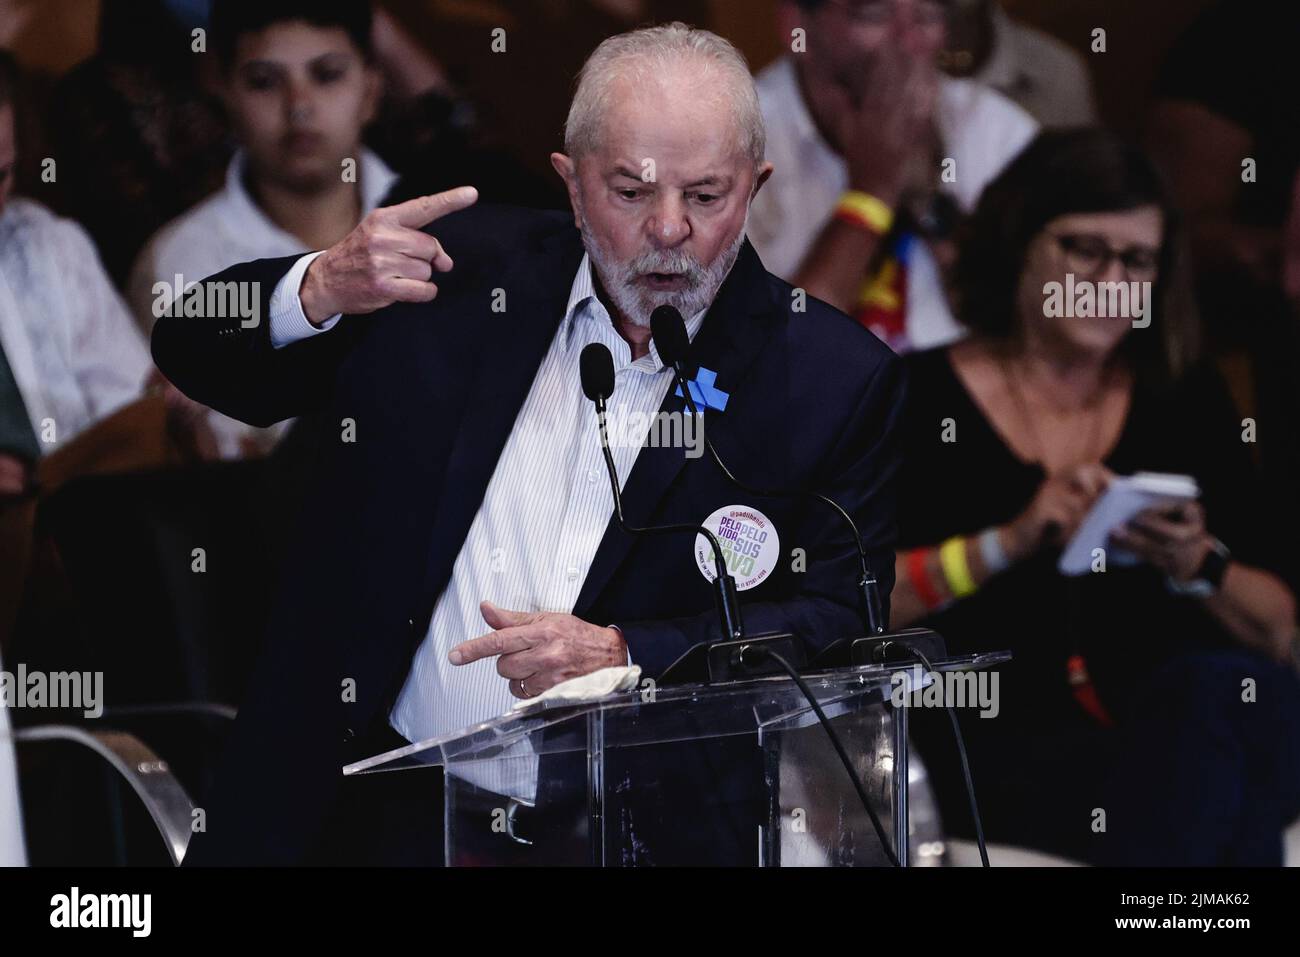 Sao Paulo, Brazil. 05th Aug, 2022. SP - Sao Paulo - 08/05/2022 - SAO PAULO, FREE, DEMOCRATIC AND POPULAR HEALTH CONFERENCE - Former president and current presidential candidate Luis Inacio Lula da Silva (PT) during the Free, Democratic and Popular Conference de Saude 2022, which takes place at Casa de Portugal, in the central region of the city of Sao Paulo, this Friday (05). The conference held by Frente Pela Vida has as its theme the defense of the Unified Health System (SUS). Photo: Ettore Chiereguini/AGIF/Sipa USA Credit: Sipa USA/Alamy Live News Stock Photo